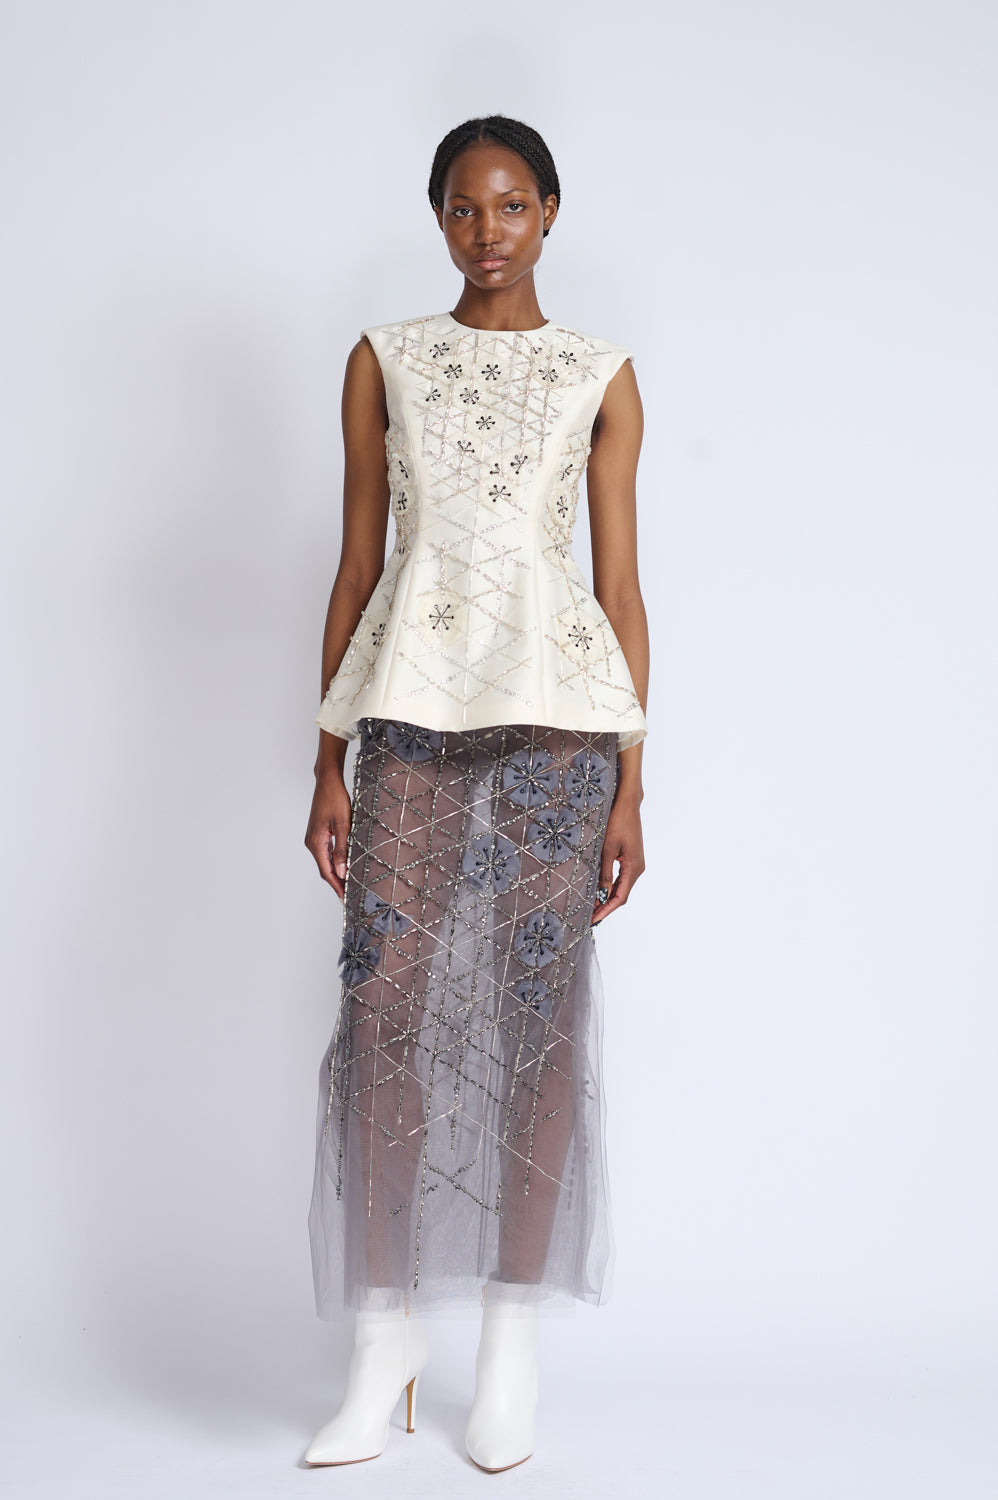 Crystal Lattice Embroidery Tulle Skirt with Side Slits